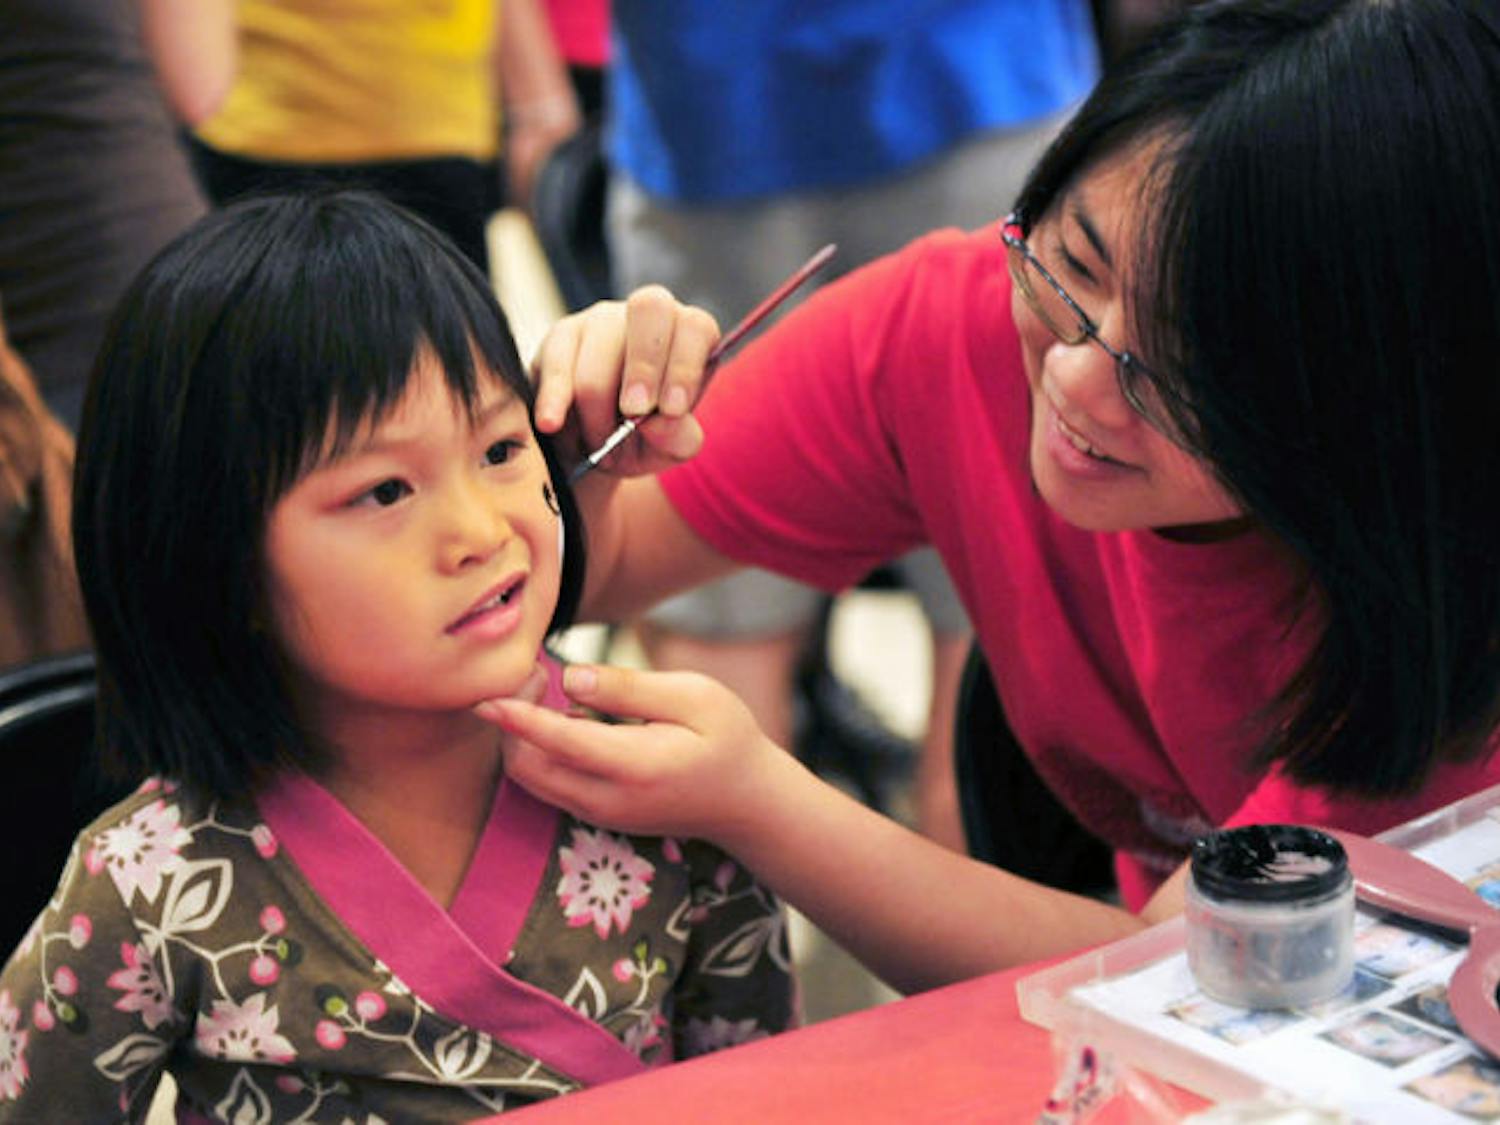 Elizabeth Wang, 19, a food science and human nutrition major at UF, paints 5-year-old Jenna Petty’s face Thursday night at the Museum Nights: Crouching Gator, Hidden Dragon! event hosted by the Samuel P. Harn Museum of Art.